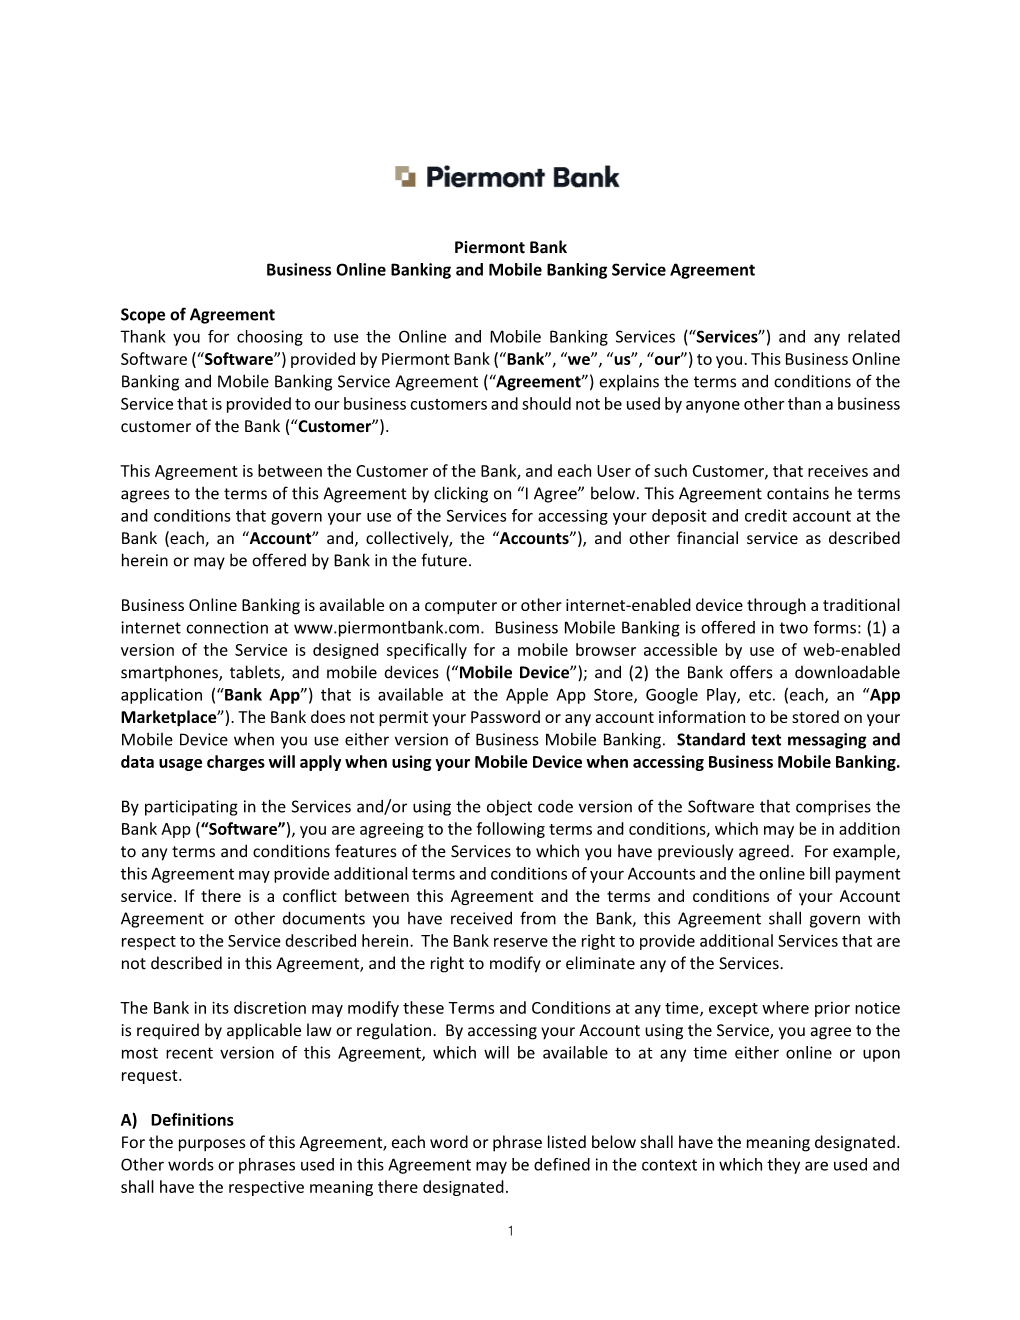 Piermont Bank Business Online Banking and Mobile Banking Service Agreement